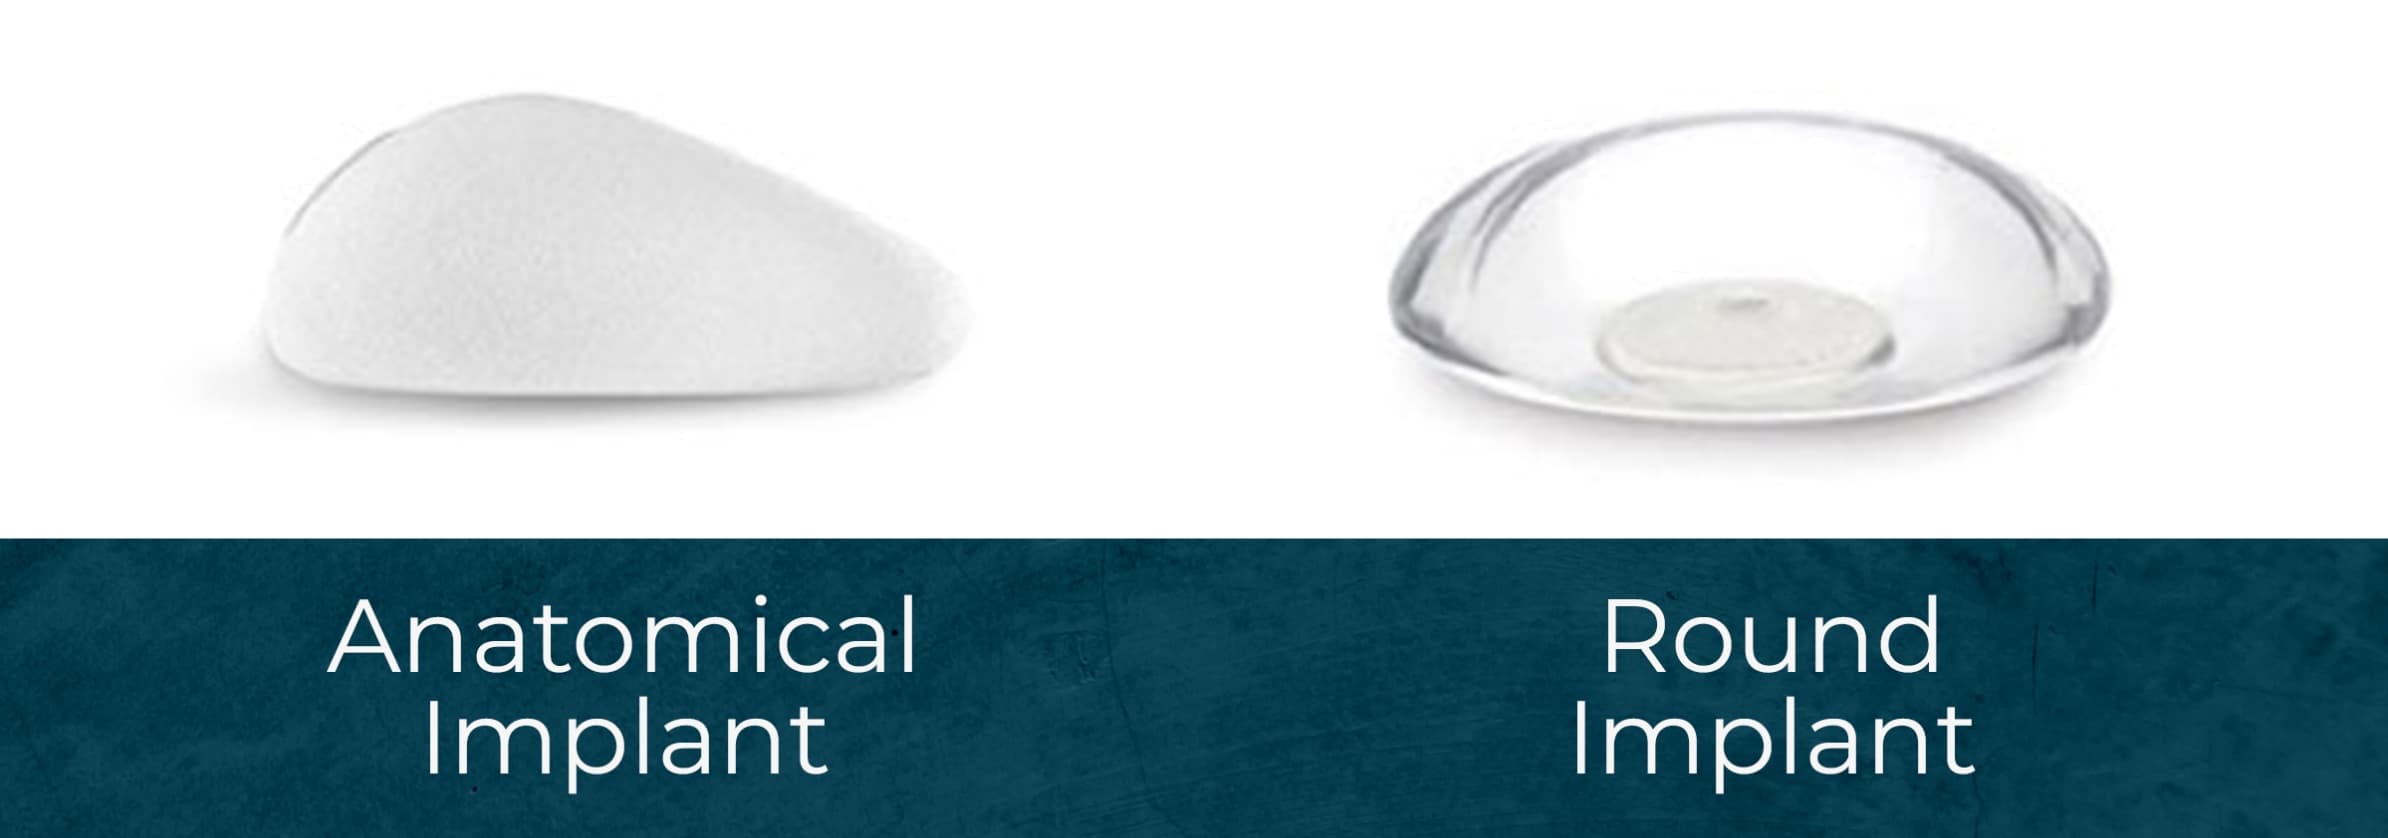 Anatomical implant and round implant